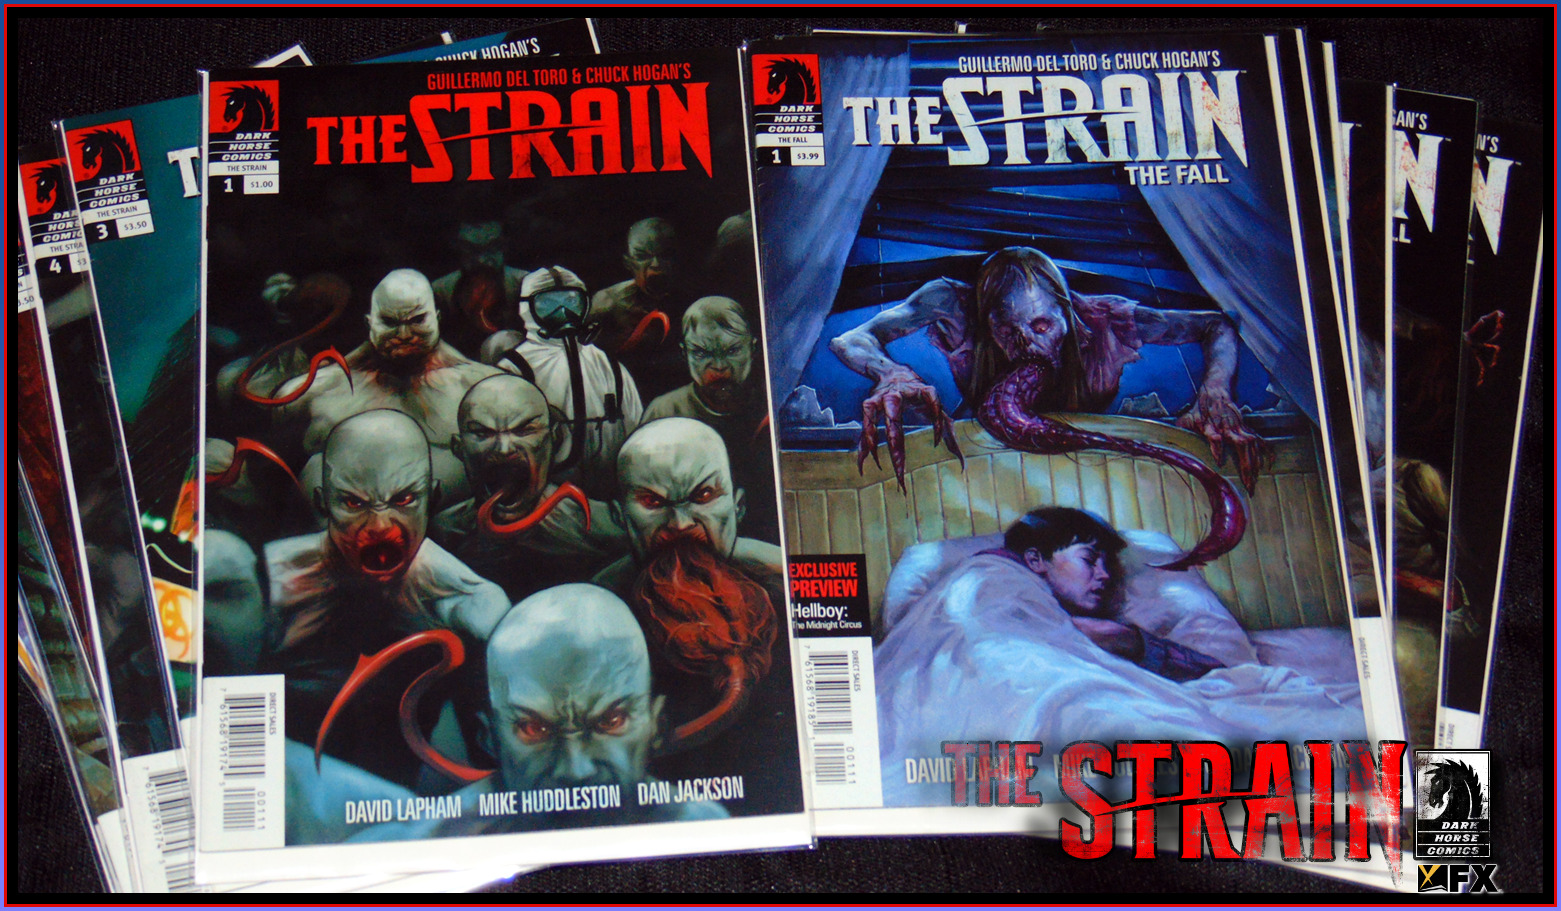 THE STRAIN #1-11 + THE STRAIN: THE FALL #1-9 LOT OF 15 ISSUES DEL TORO 7.5 VF-